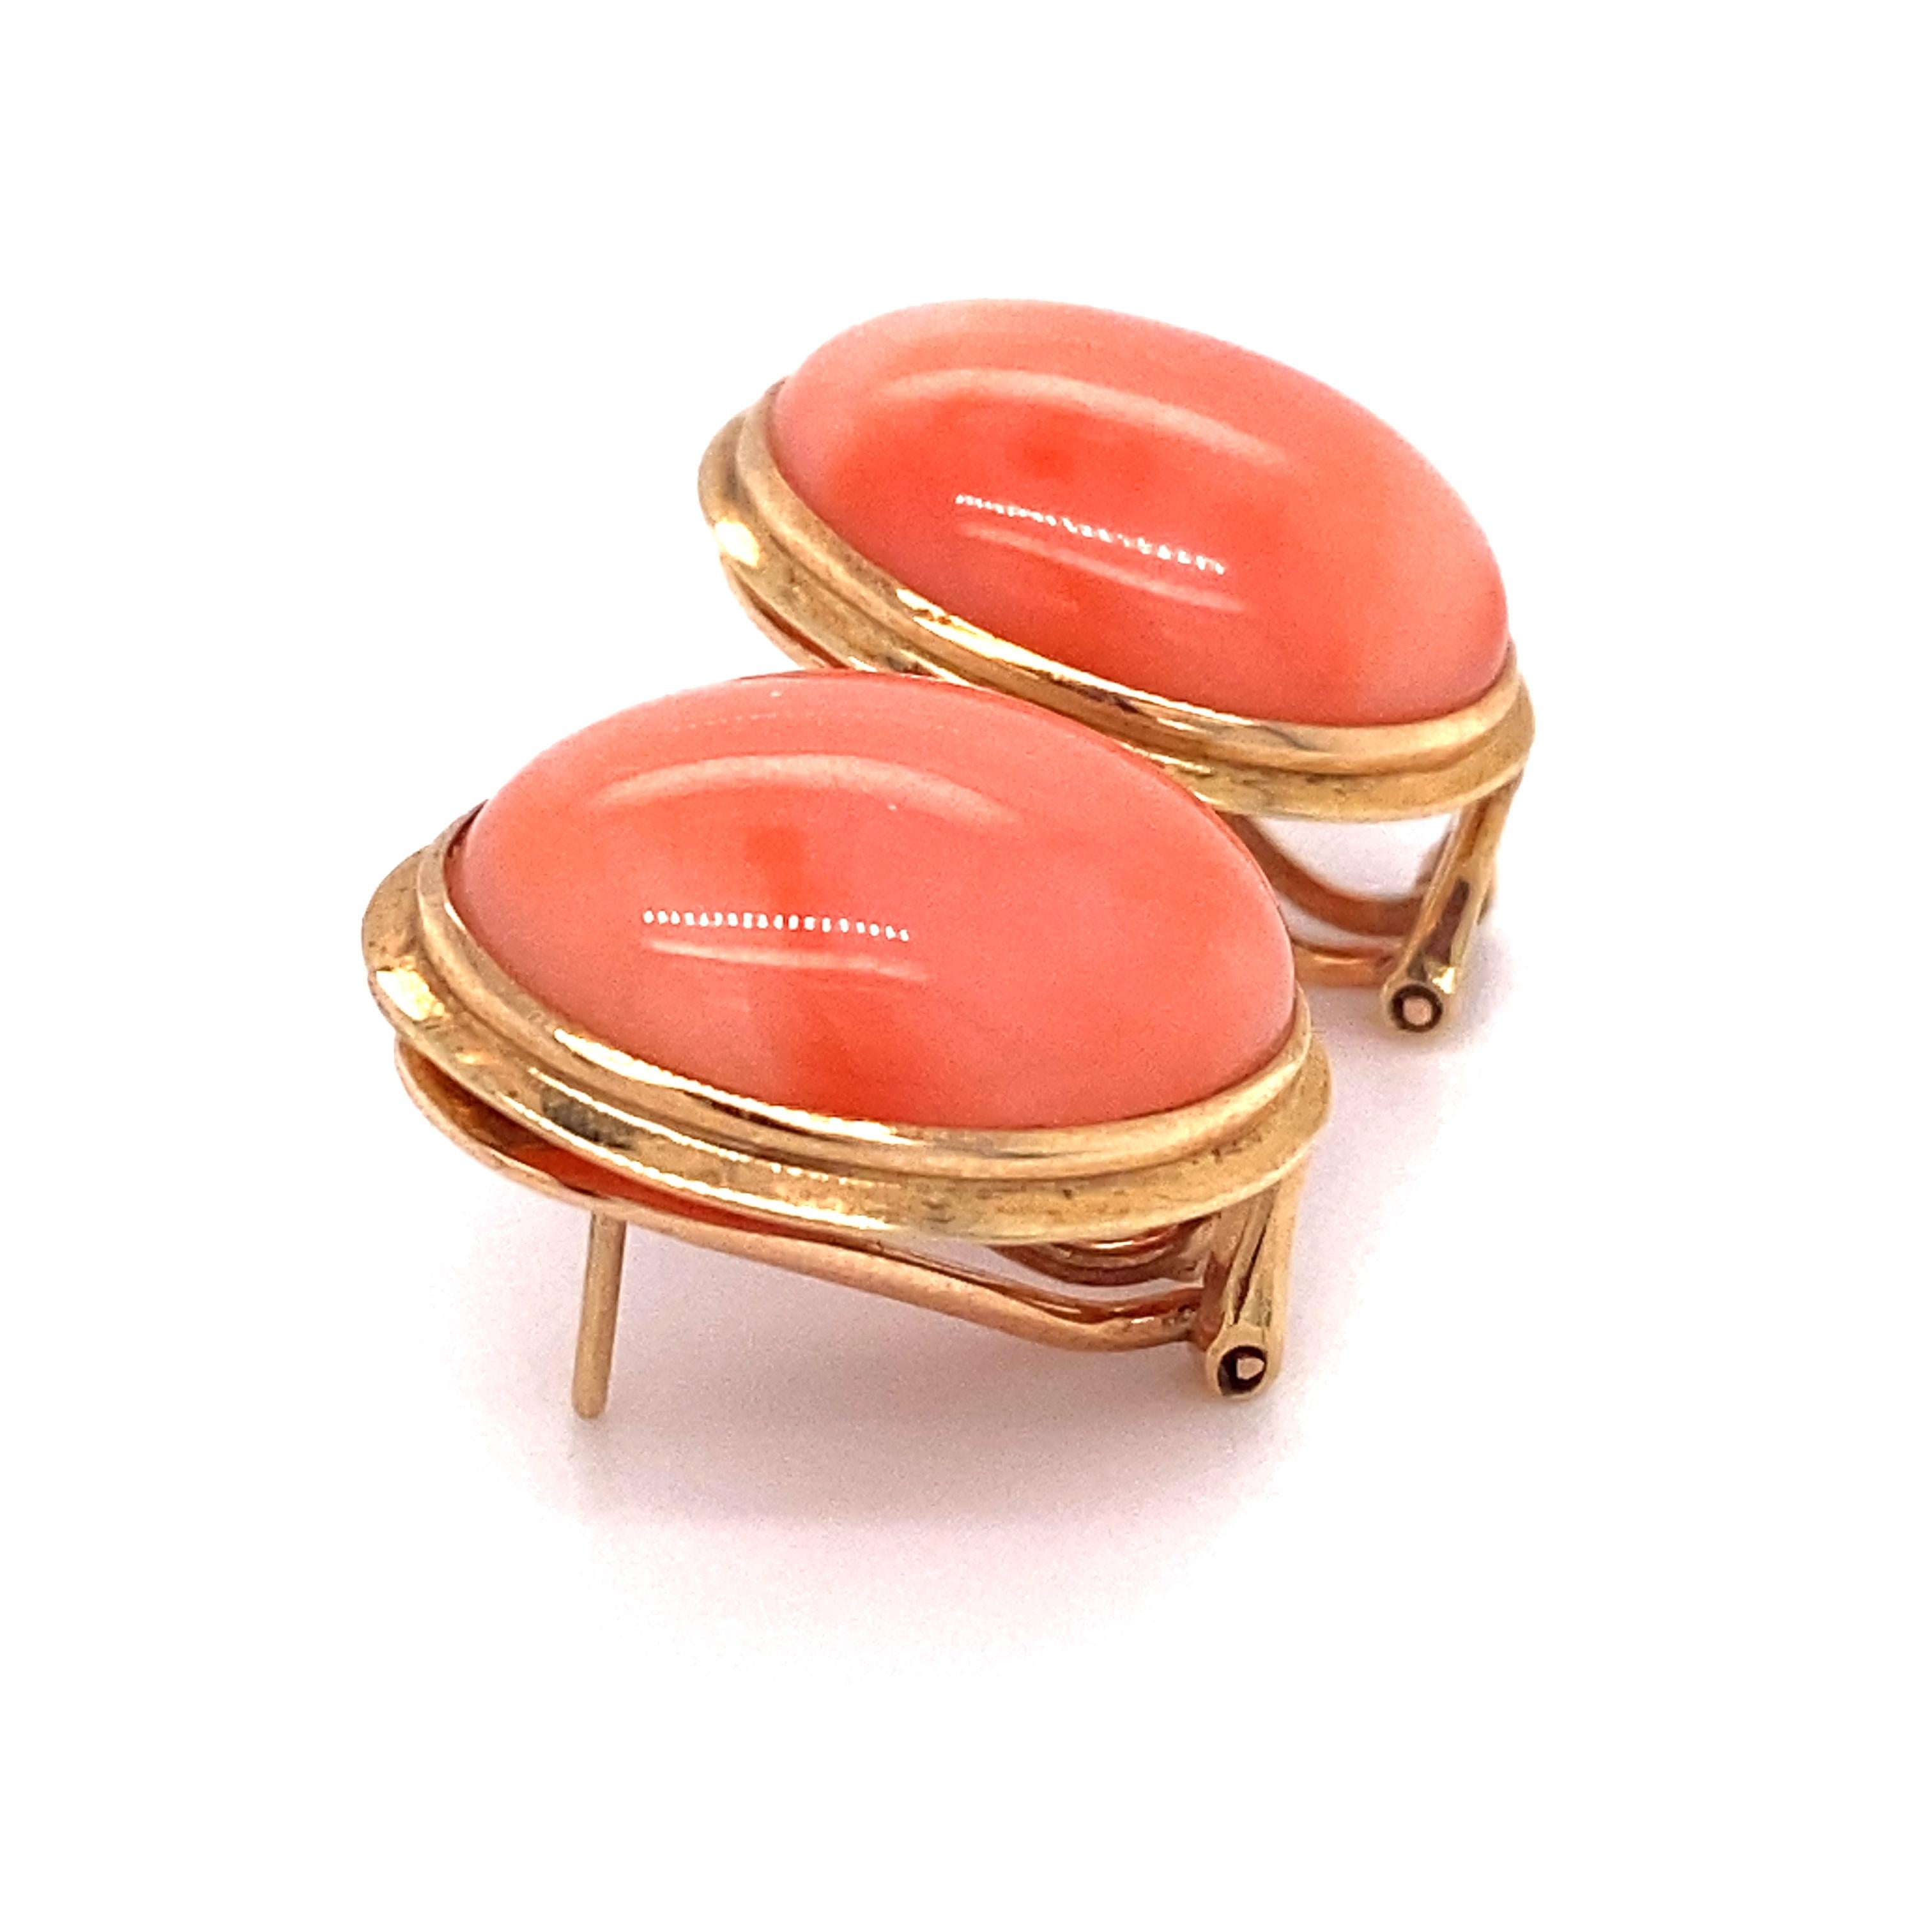 Circa 1920s Oval Orange Coral Button Earrings in 14 Karat Gold In Excellent Condition For Sale In Atlanta, GA